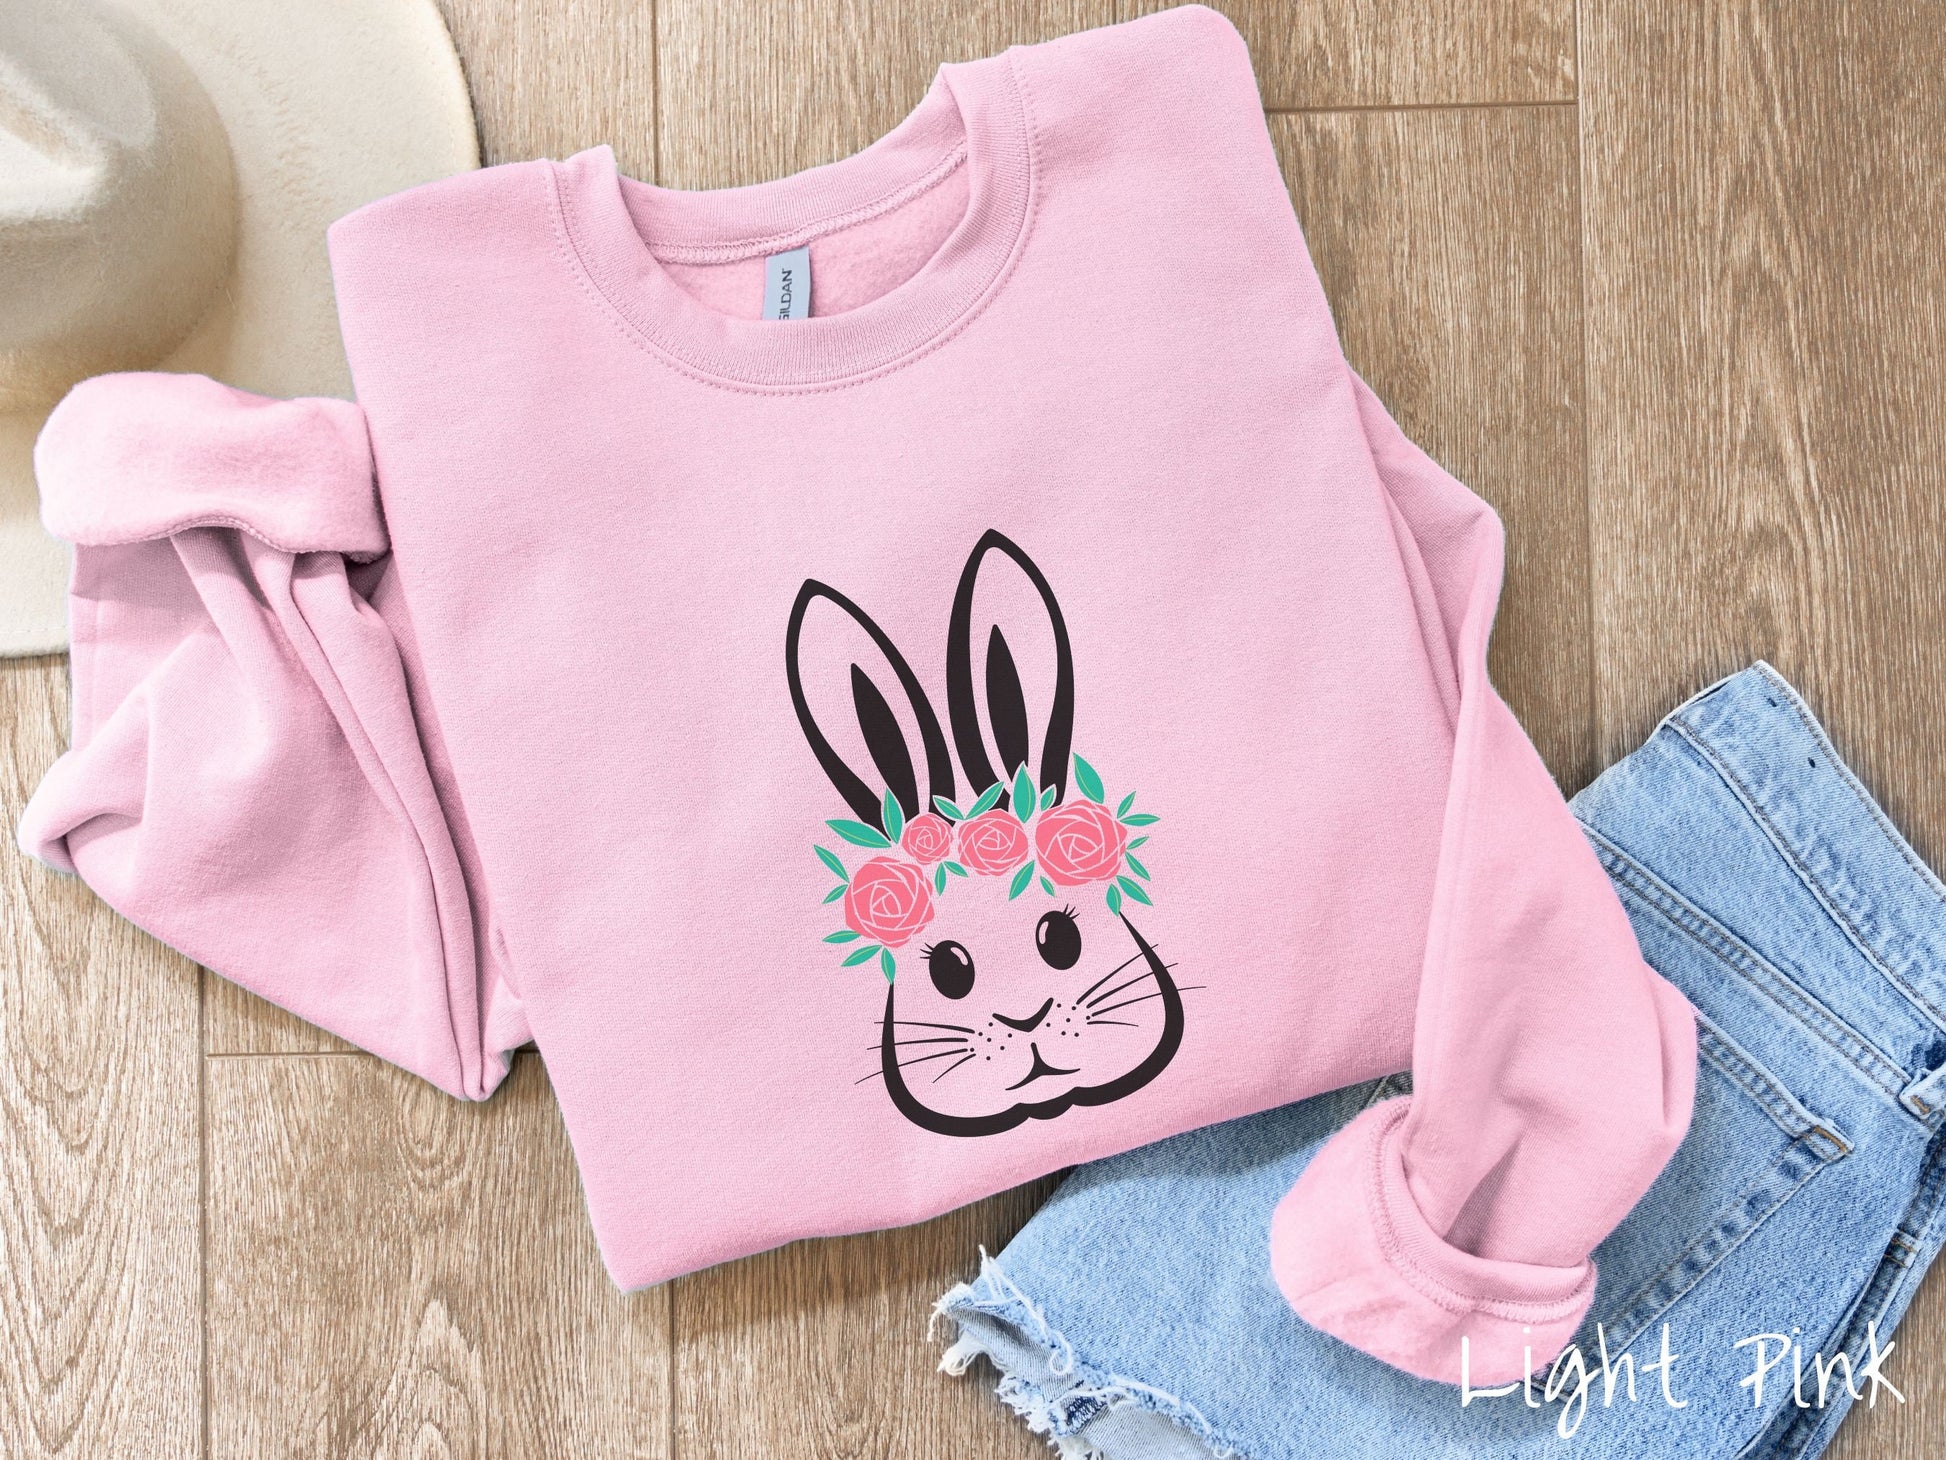 A cute, vintage light pink colored sweatshirt with a black outline of a bunny rabbit with eyelashes, whiskers, and floppy ears that has a pink flowered headband resting below its large ears.